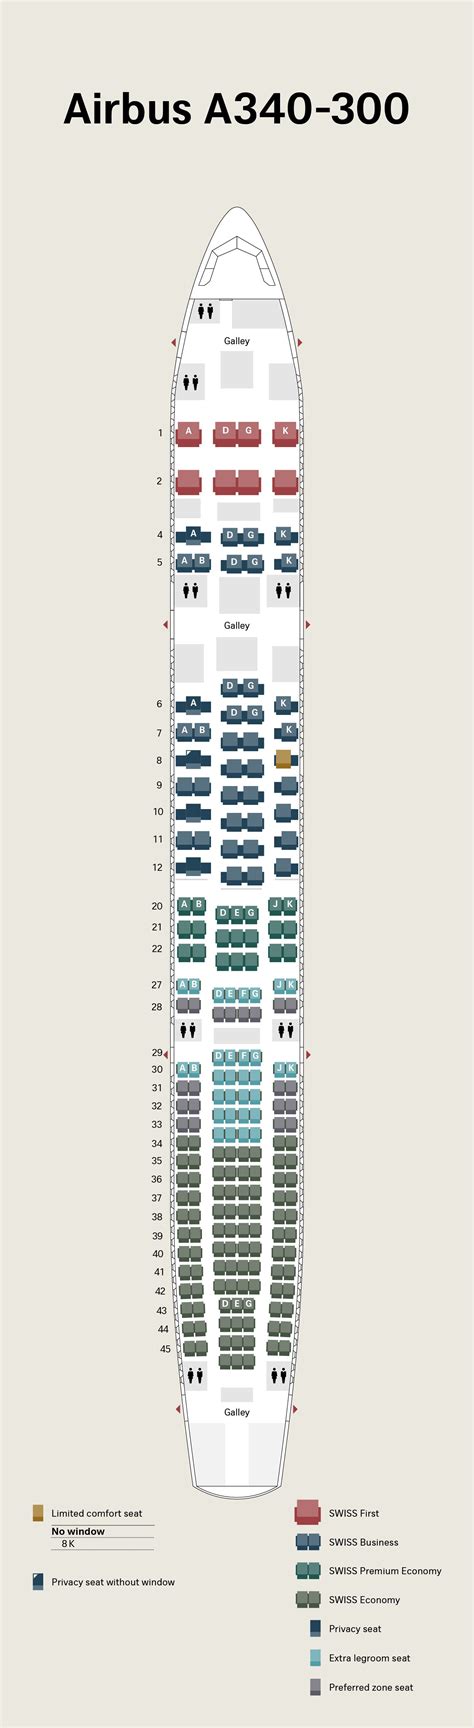 Airbus A Seating Plan Lufthansa Awesome Home